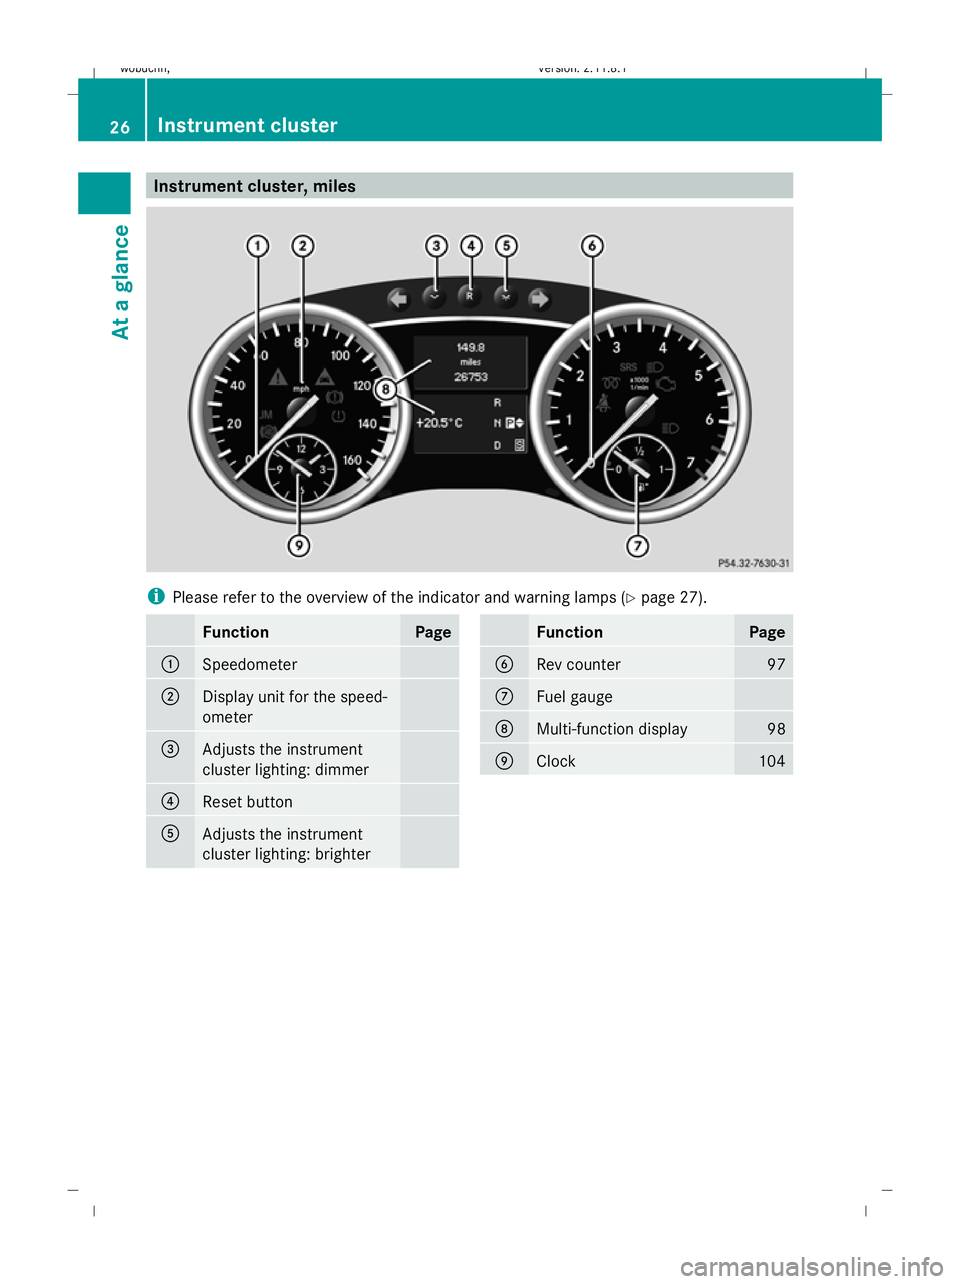 MERCEDES-BENZ GL SUV 2009 Owners Manual Instrument cluster, miles
i
Please refer to the overview of the indicator and warning lamps ( Ypage 27). Function Page
:
Speedometer
;
Display unit for the speed-
ometer
=
Adjusts the instrument
clust